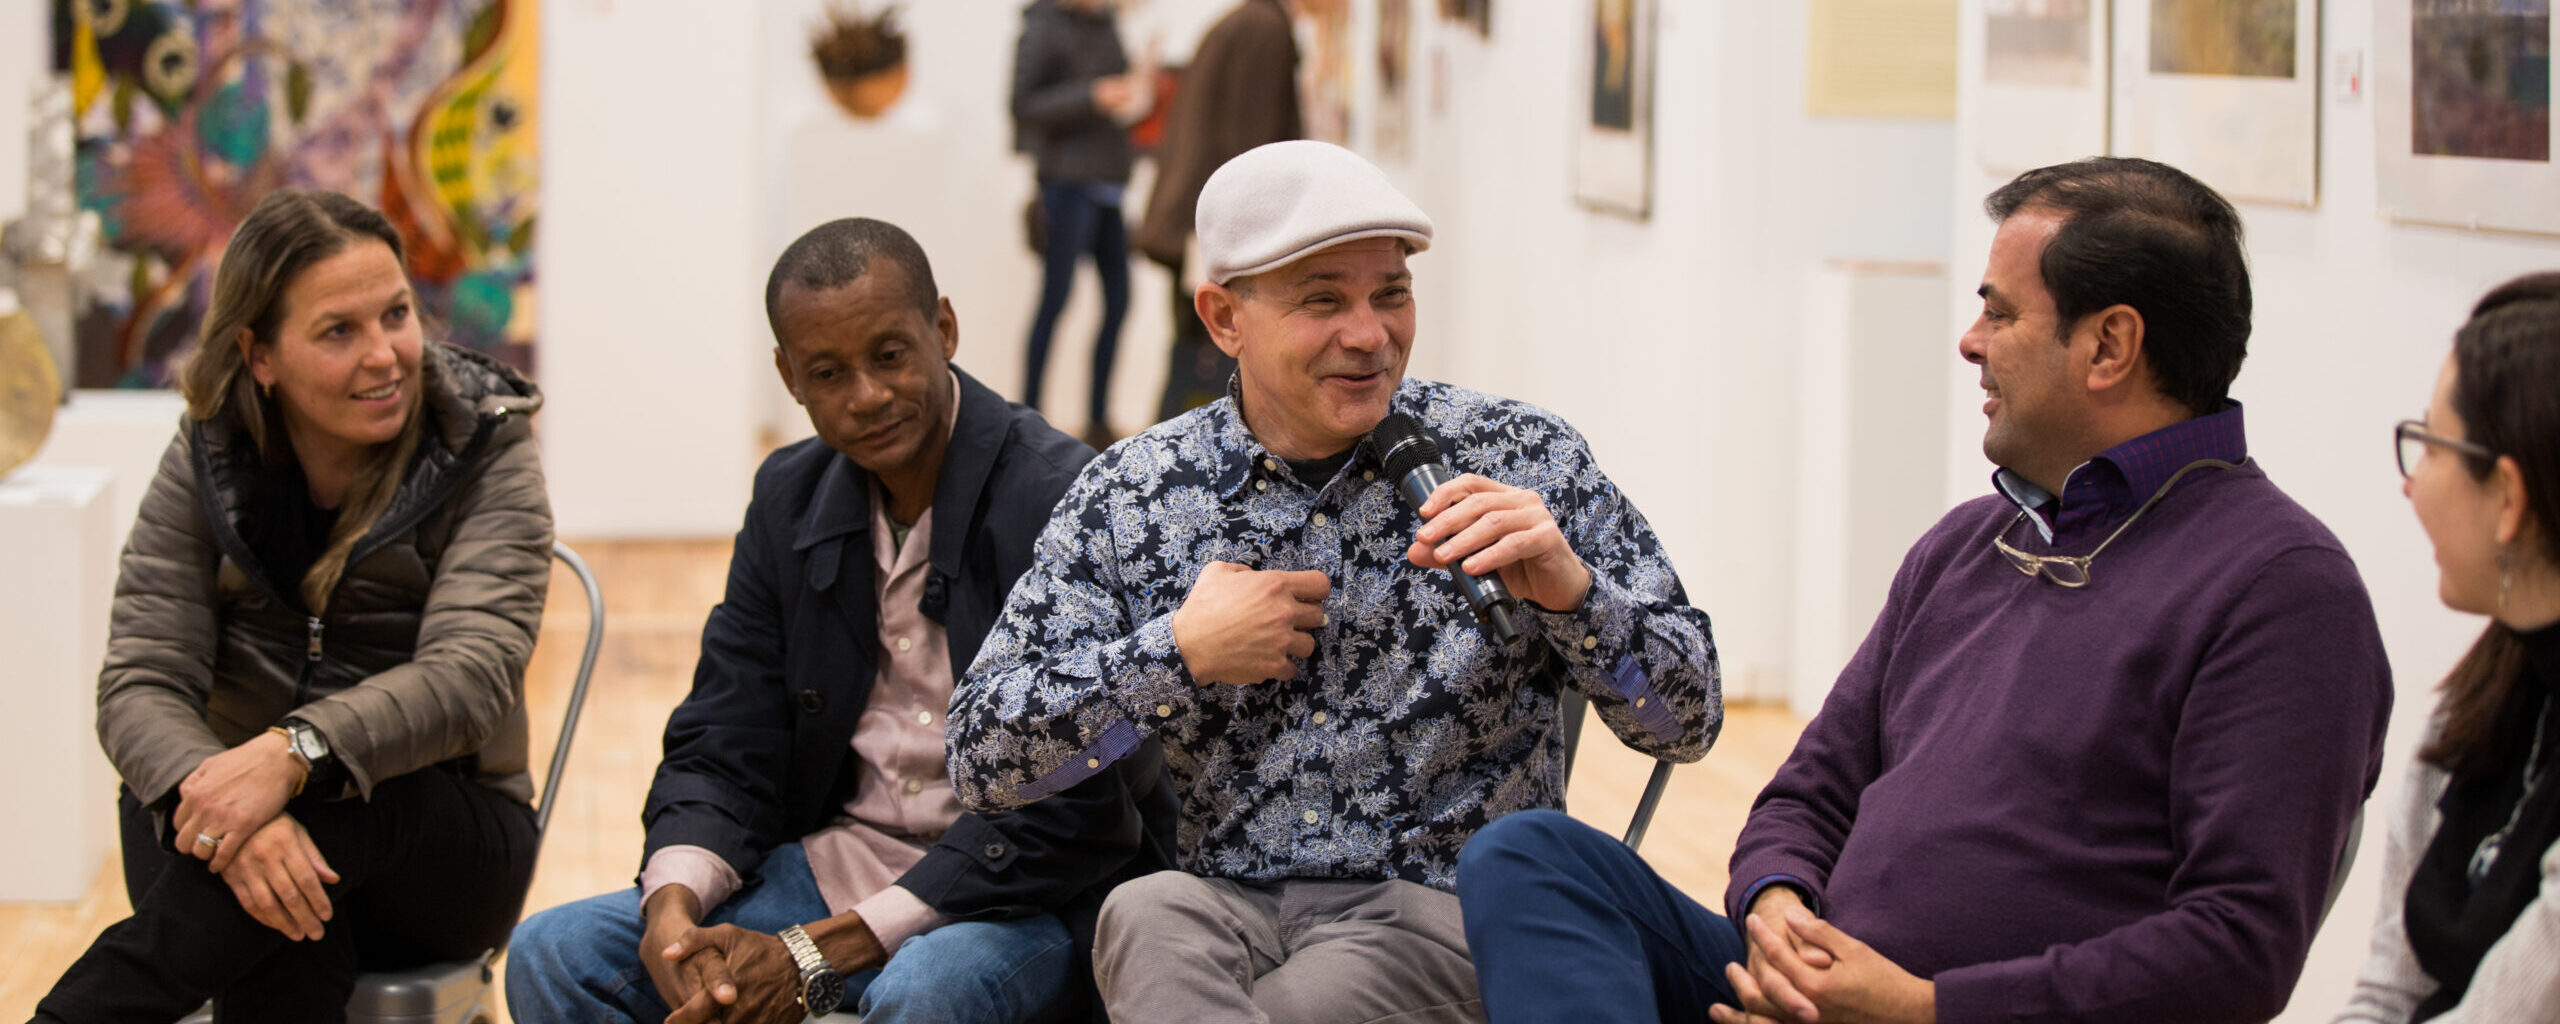 group of people sitting and talking at art exhibit